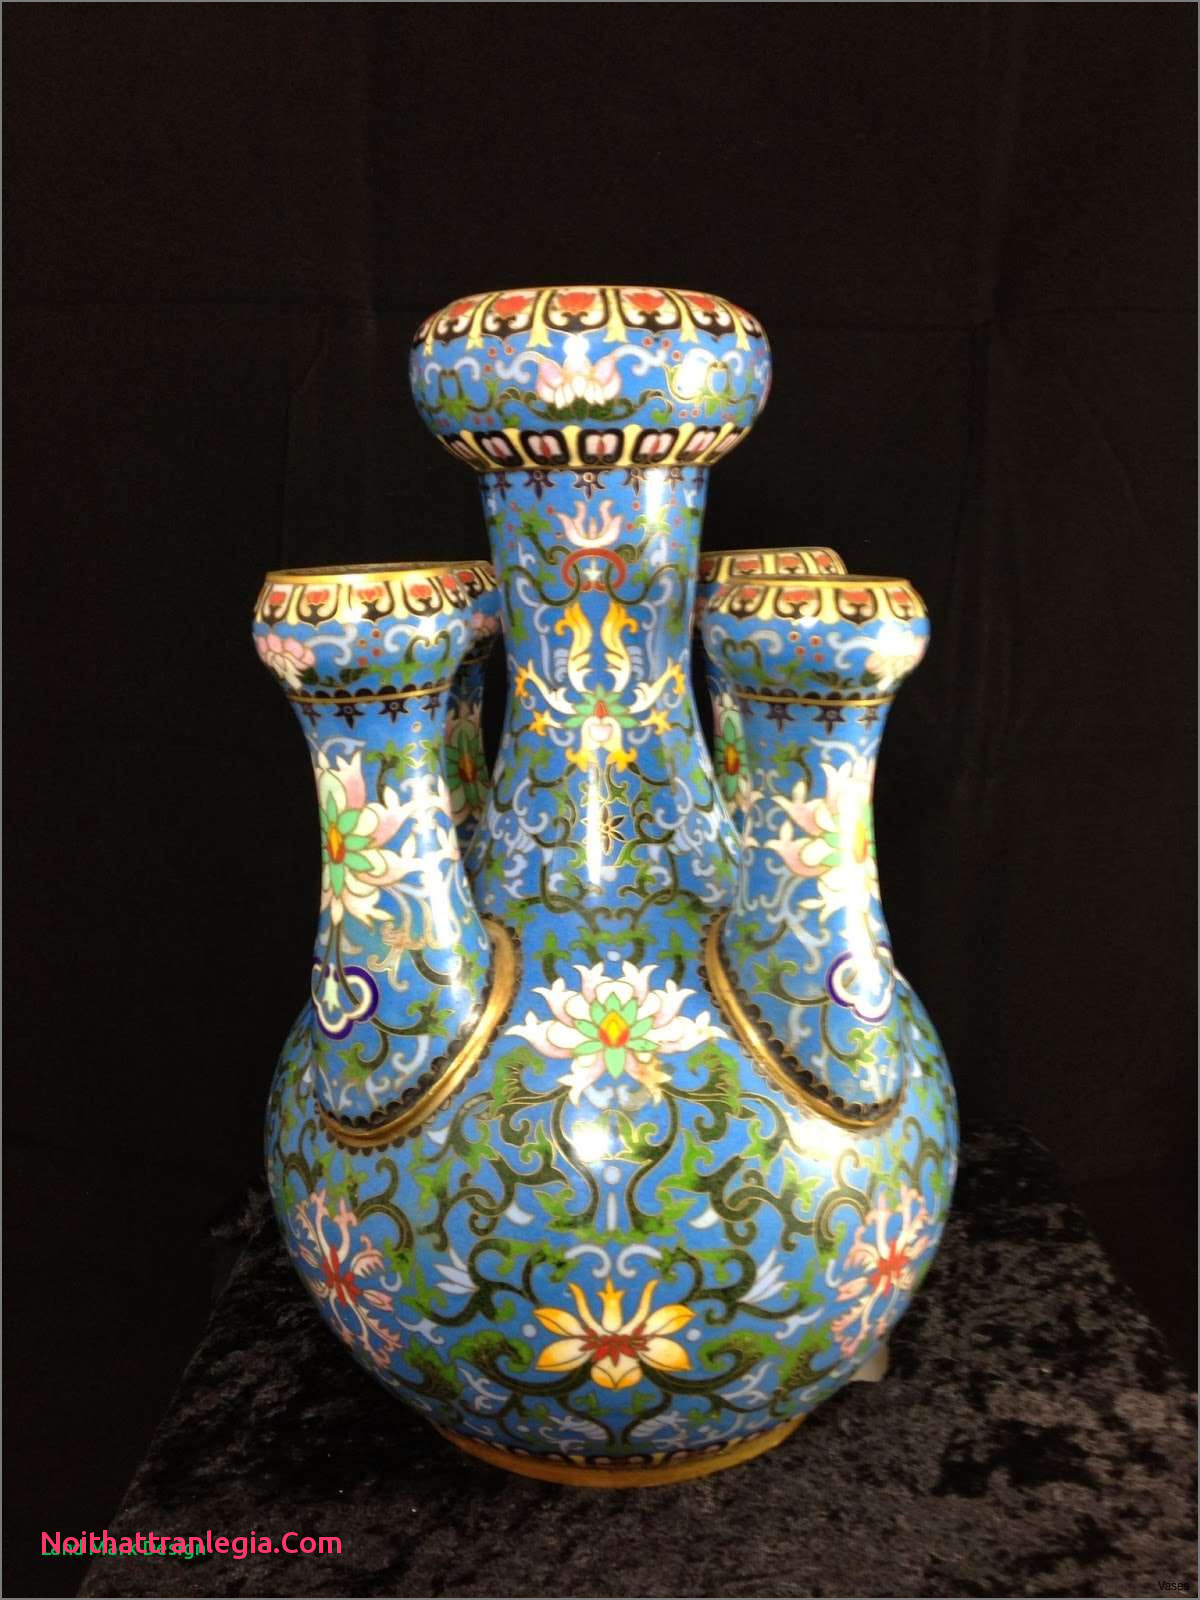 28 Best Porcelain Vase China 2024 free download porcelain vase china of 20 chinese antique vase noithattranlegia vases design inside 213 1h vases antique asian the increased trade of chinese ware during 16th century has significantly